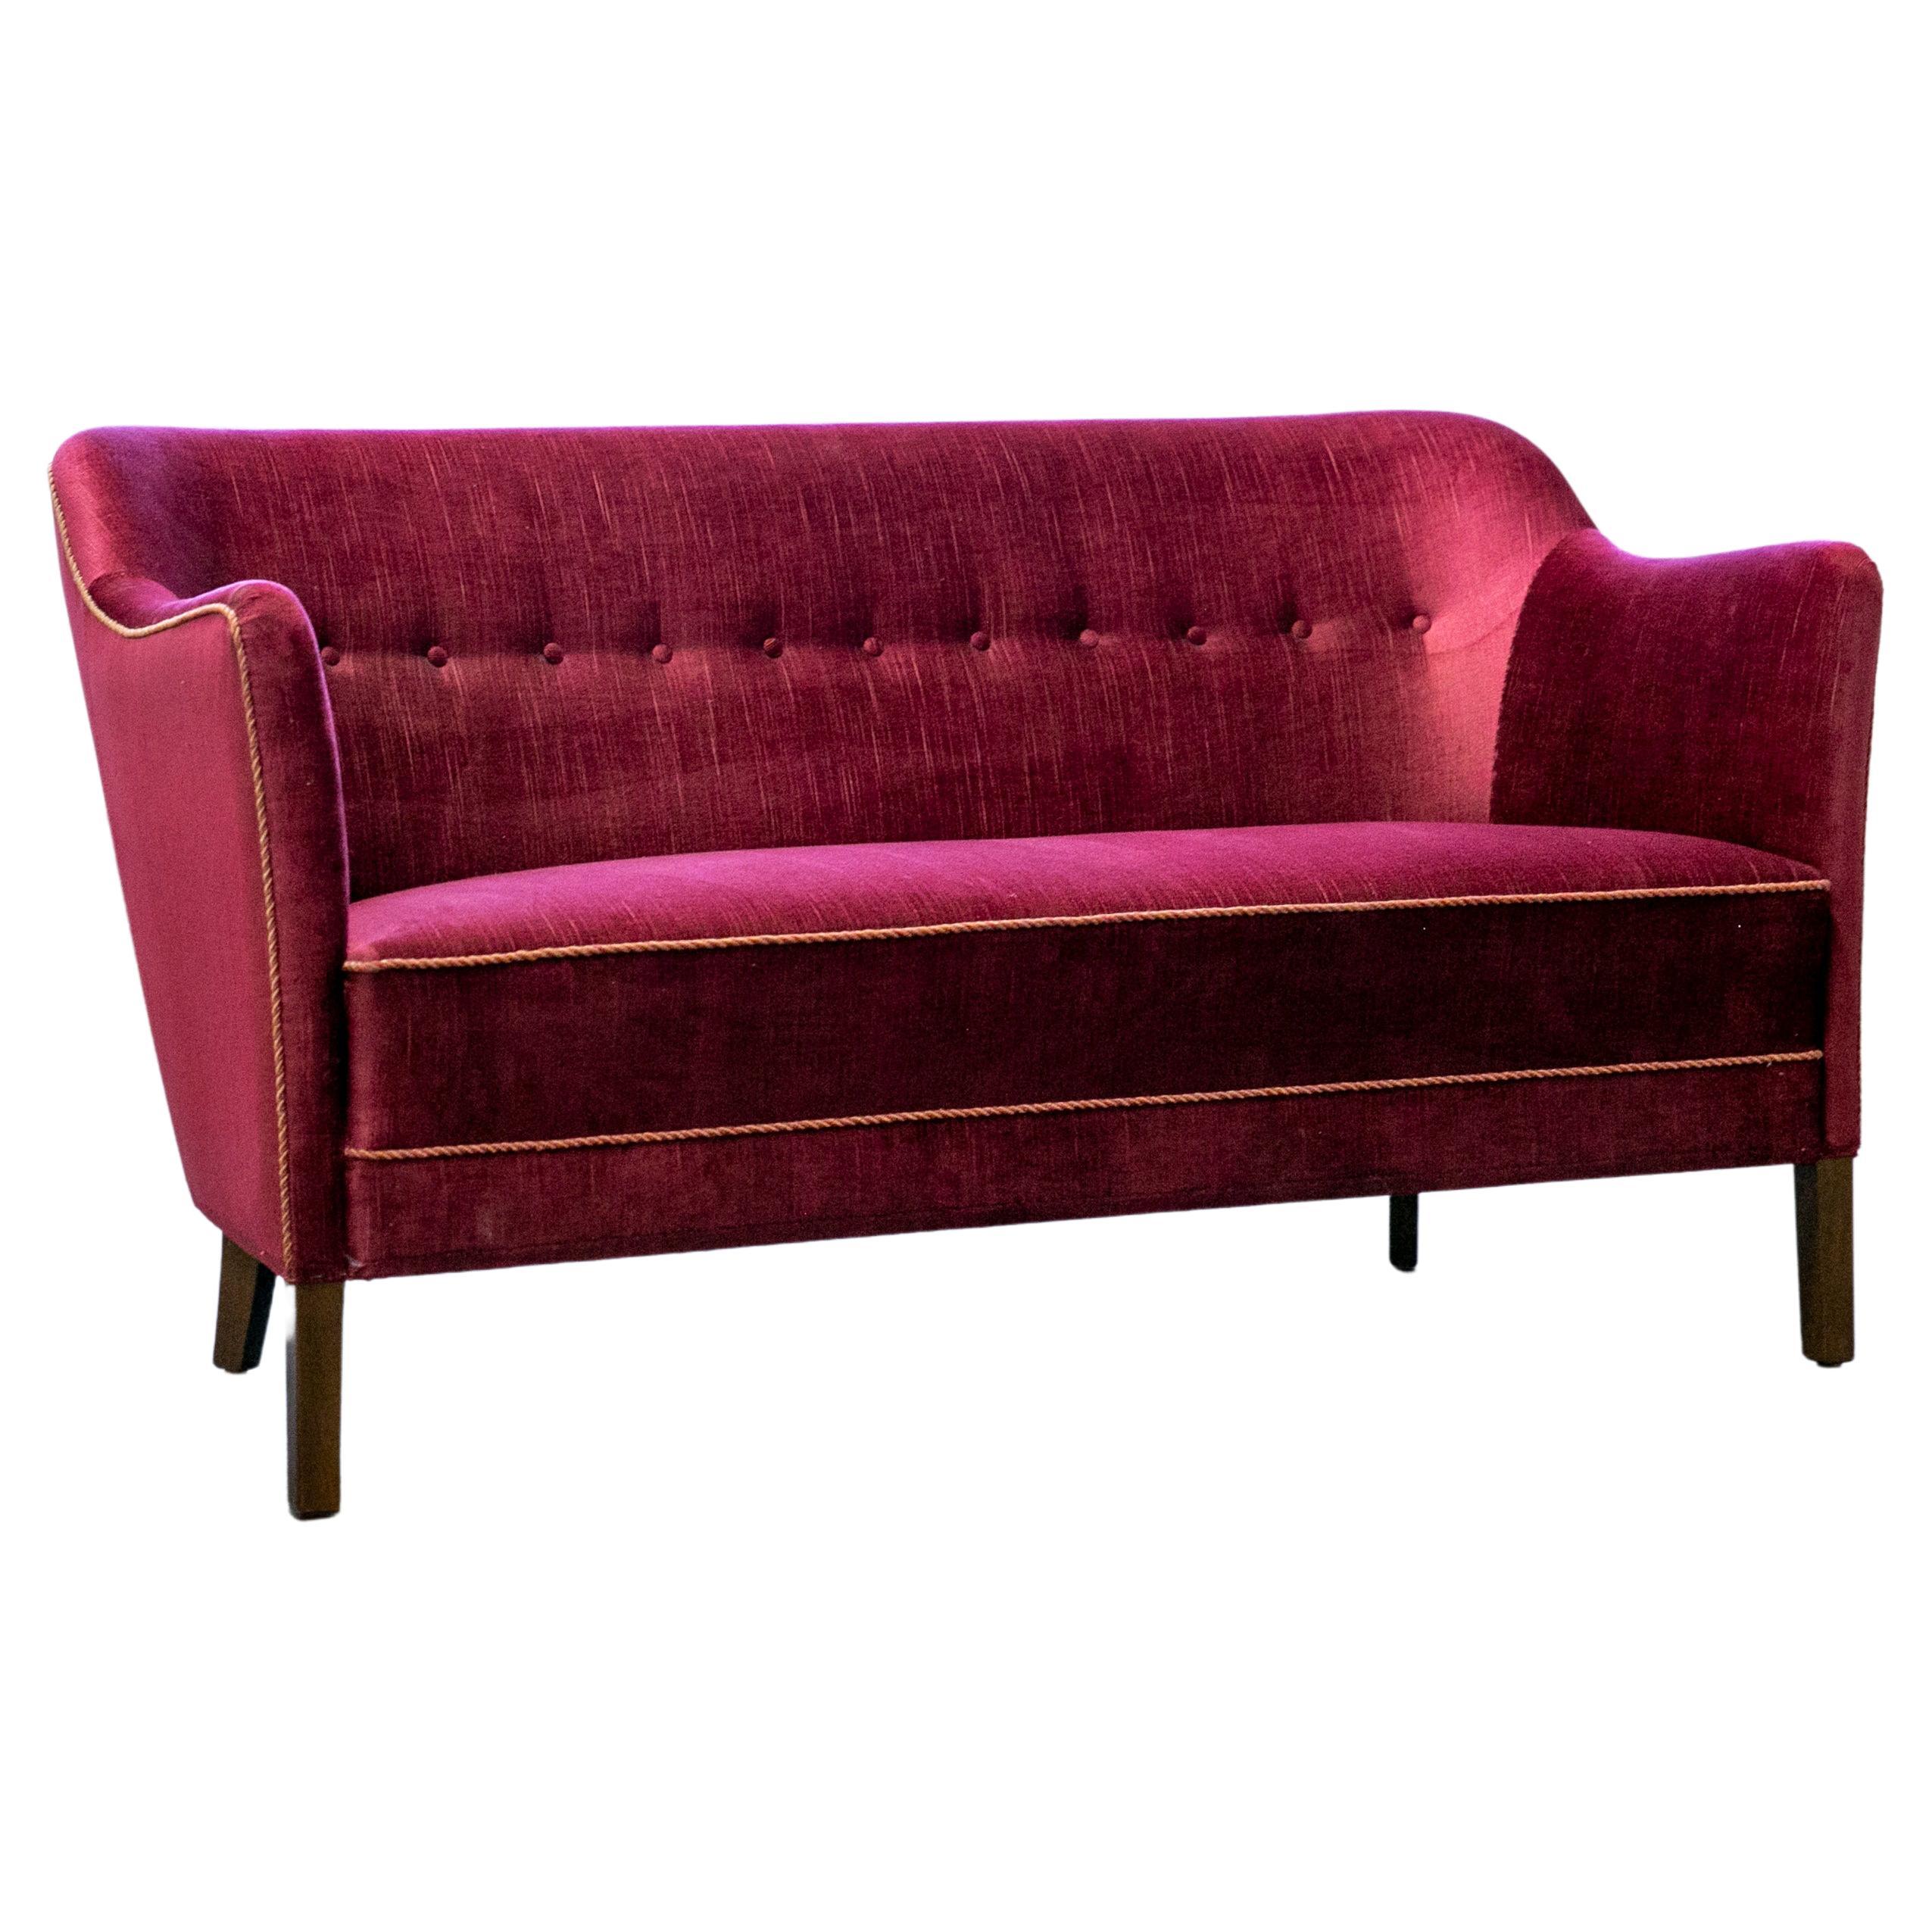 Danish 1950s Settee or Loveseat in Red Mohair Attributed to Peter Hvidt